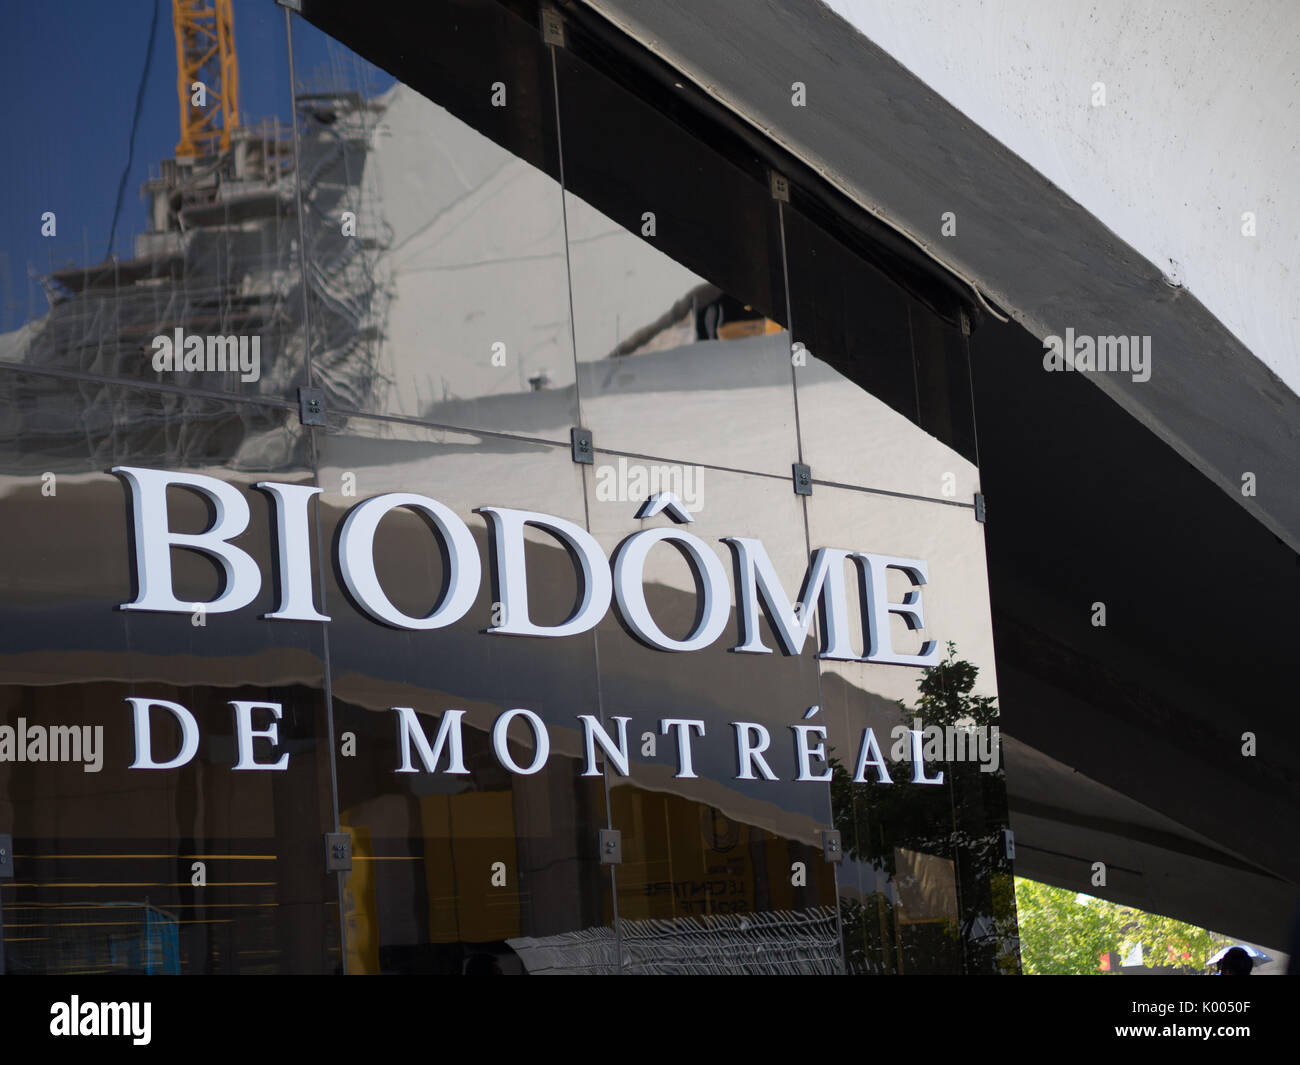 The Biodome in Montreal, Quebec, Canada (showing sign) Stock Photo